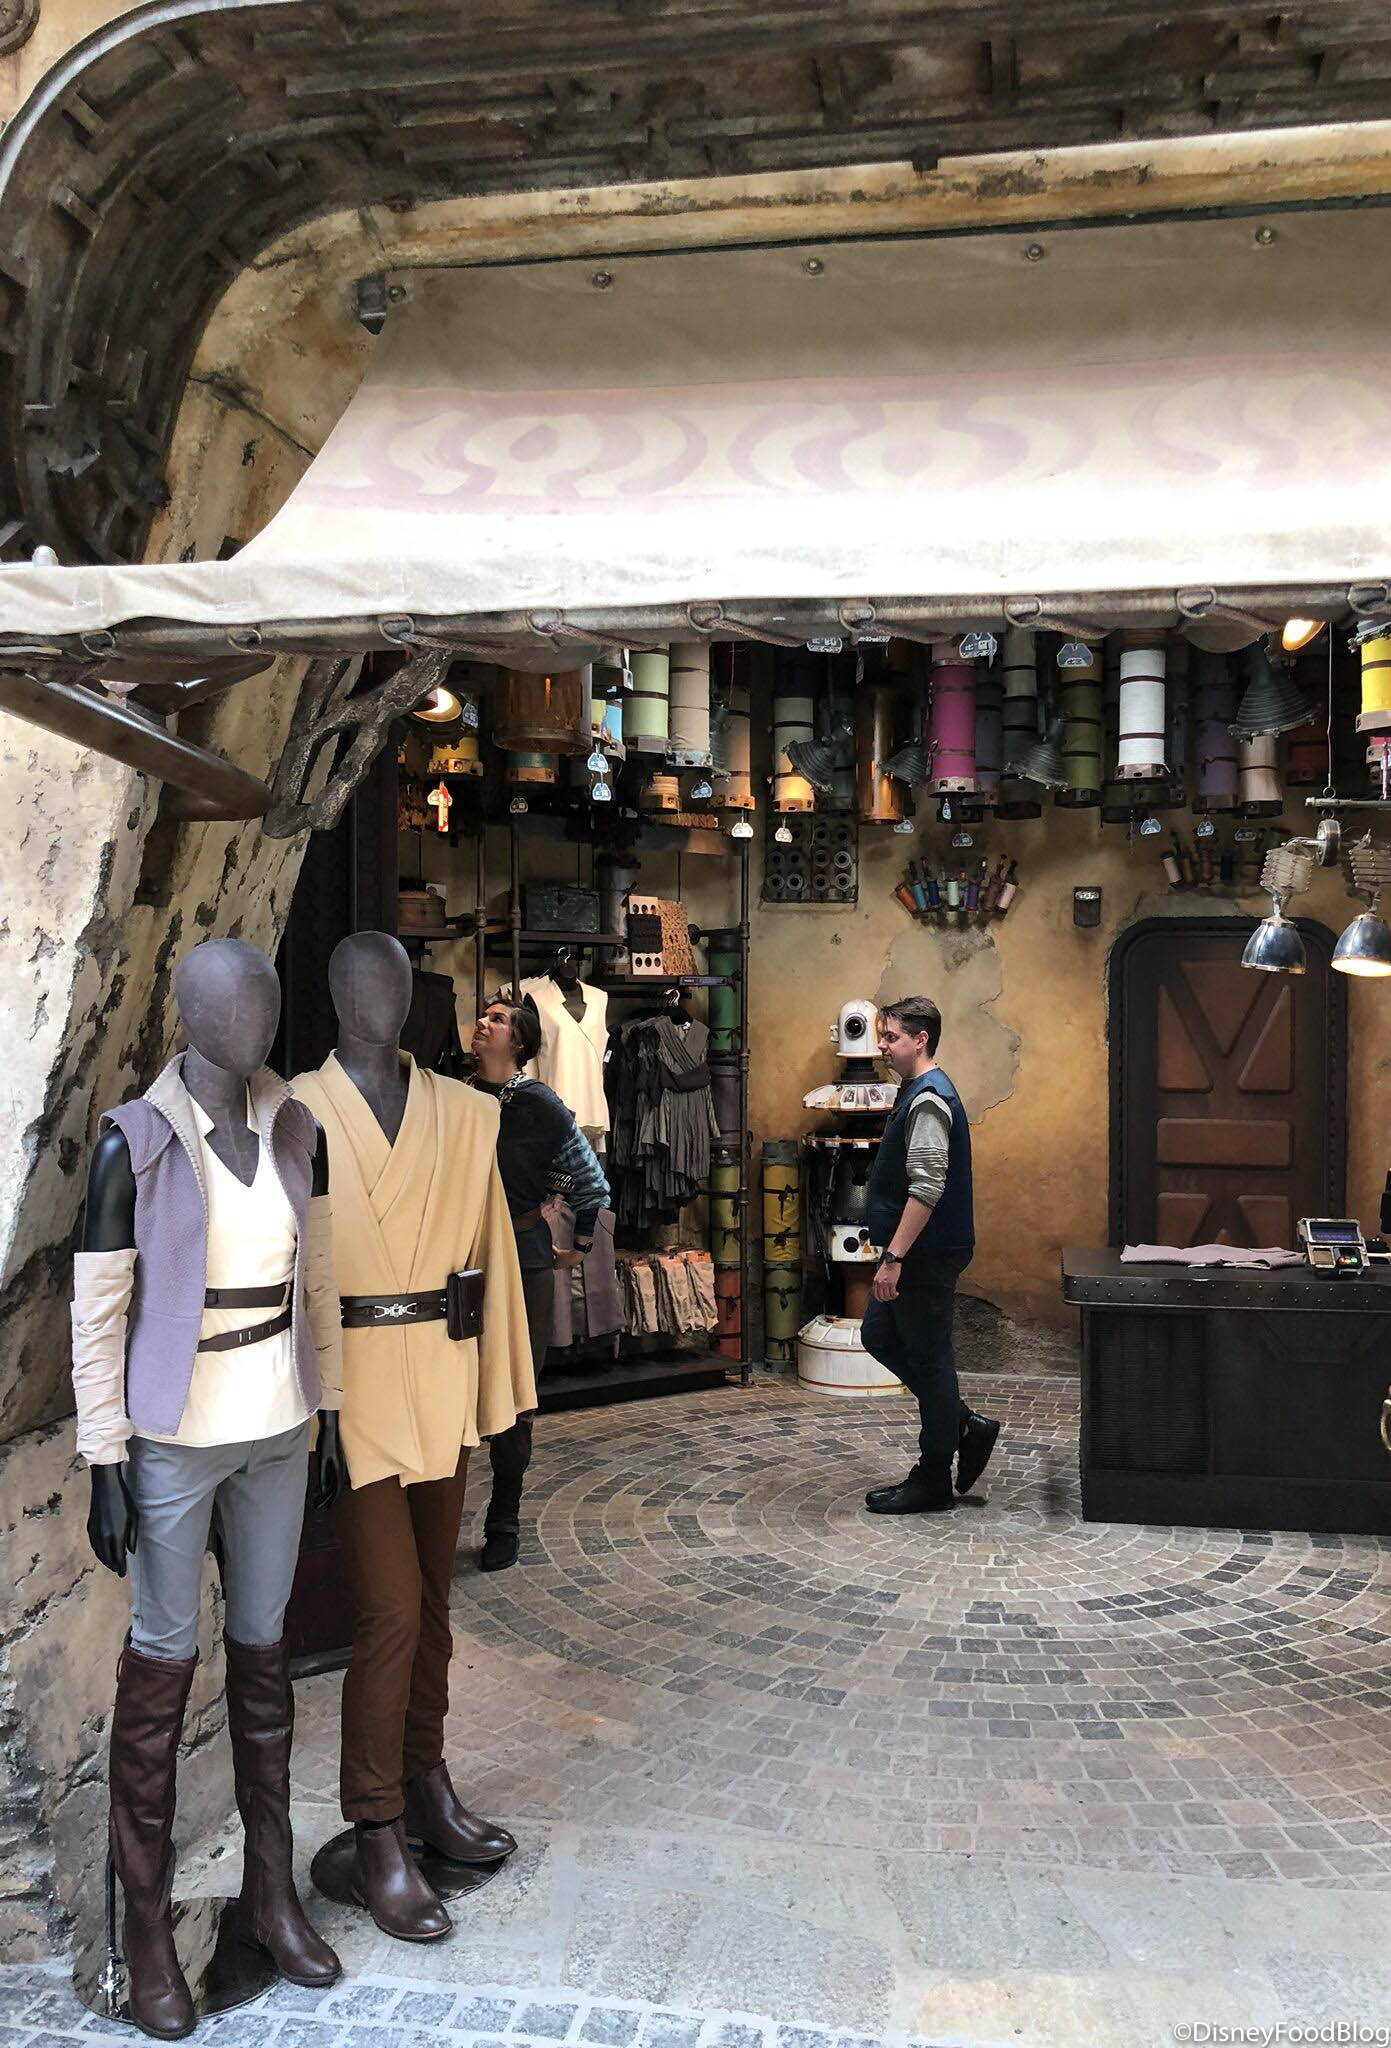 Dress The Part At Black Spire Outfitters In Star Wars: Galaxy’s Edge